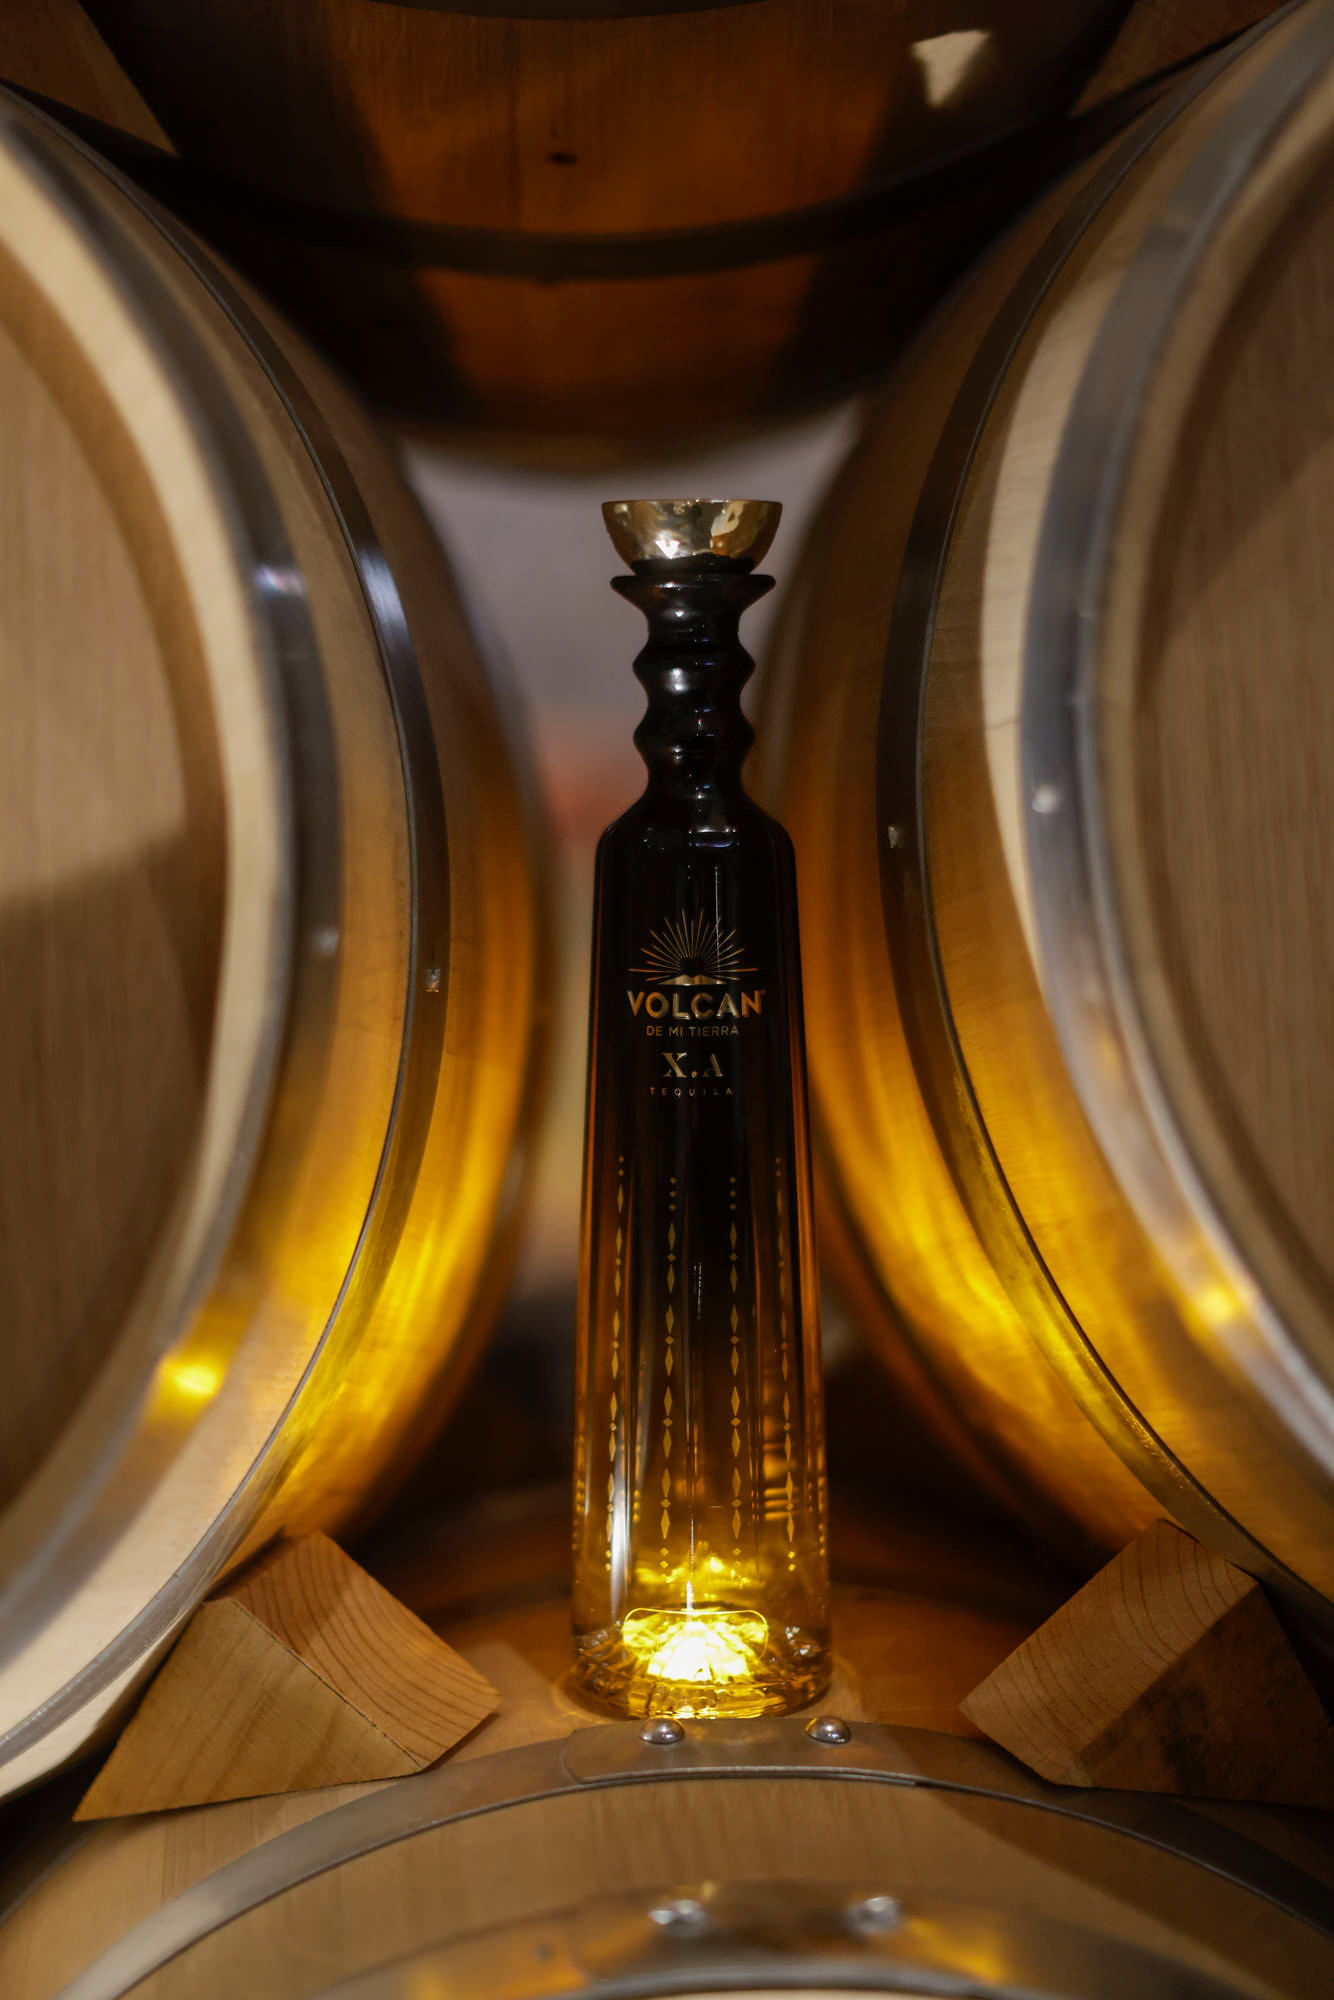 Volcán X.A. bottle in the barrel aging room